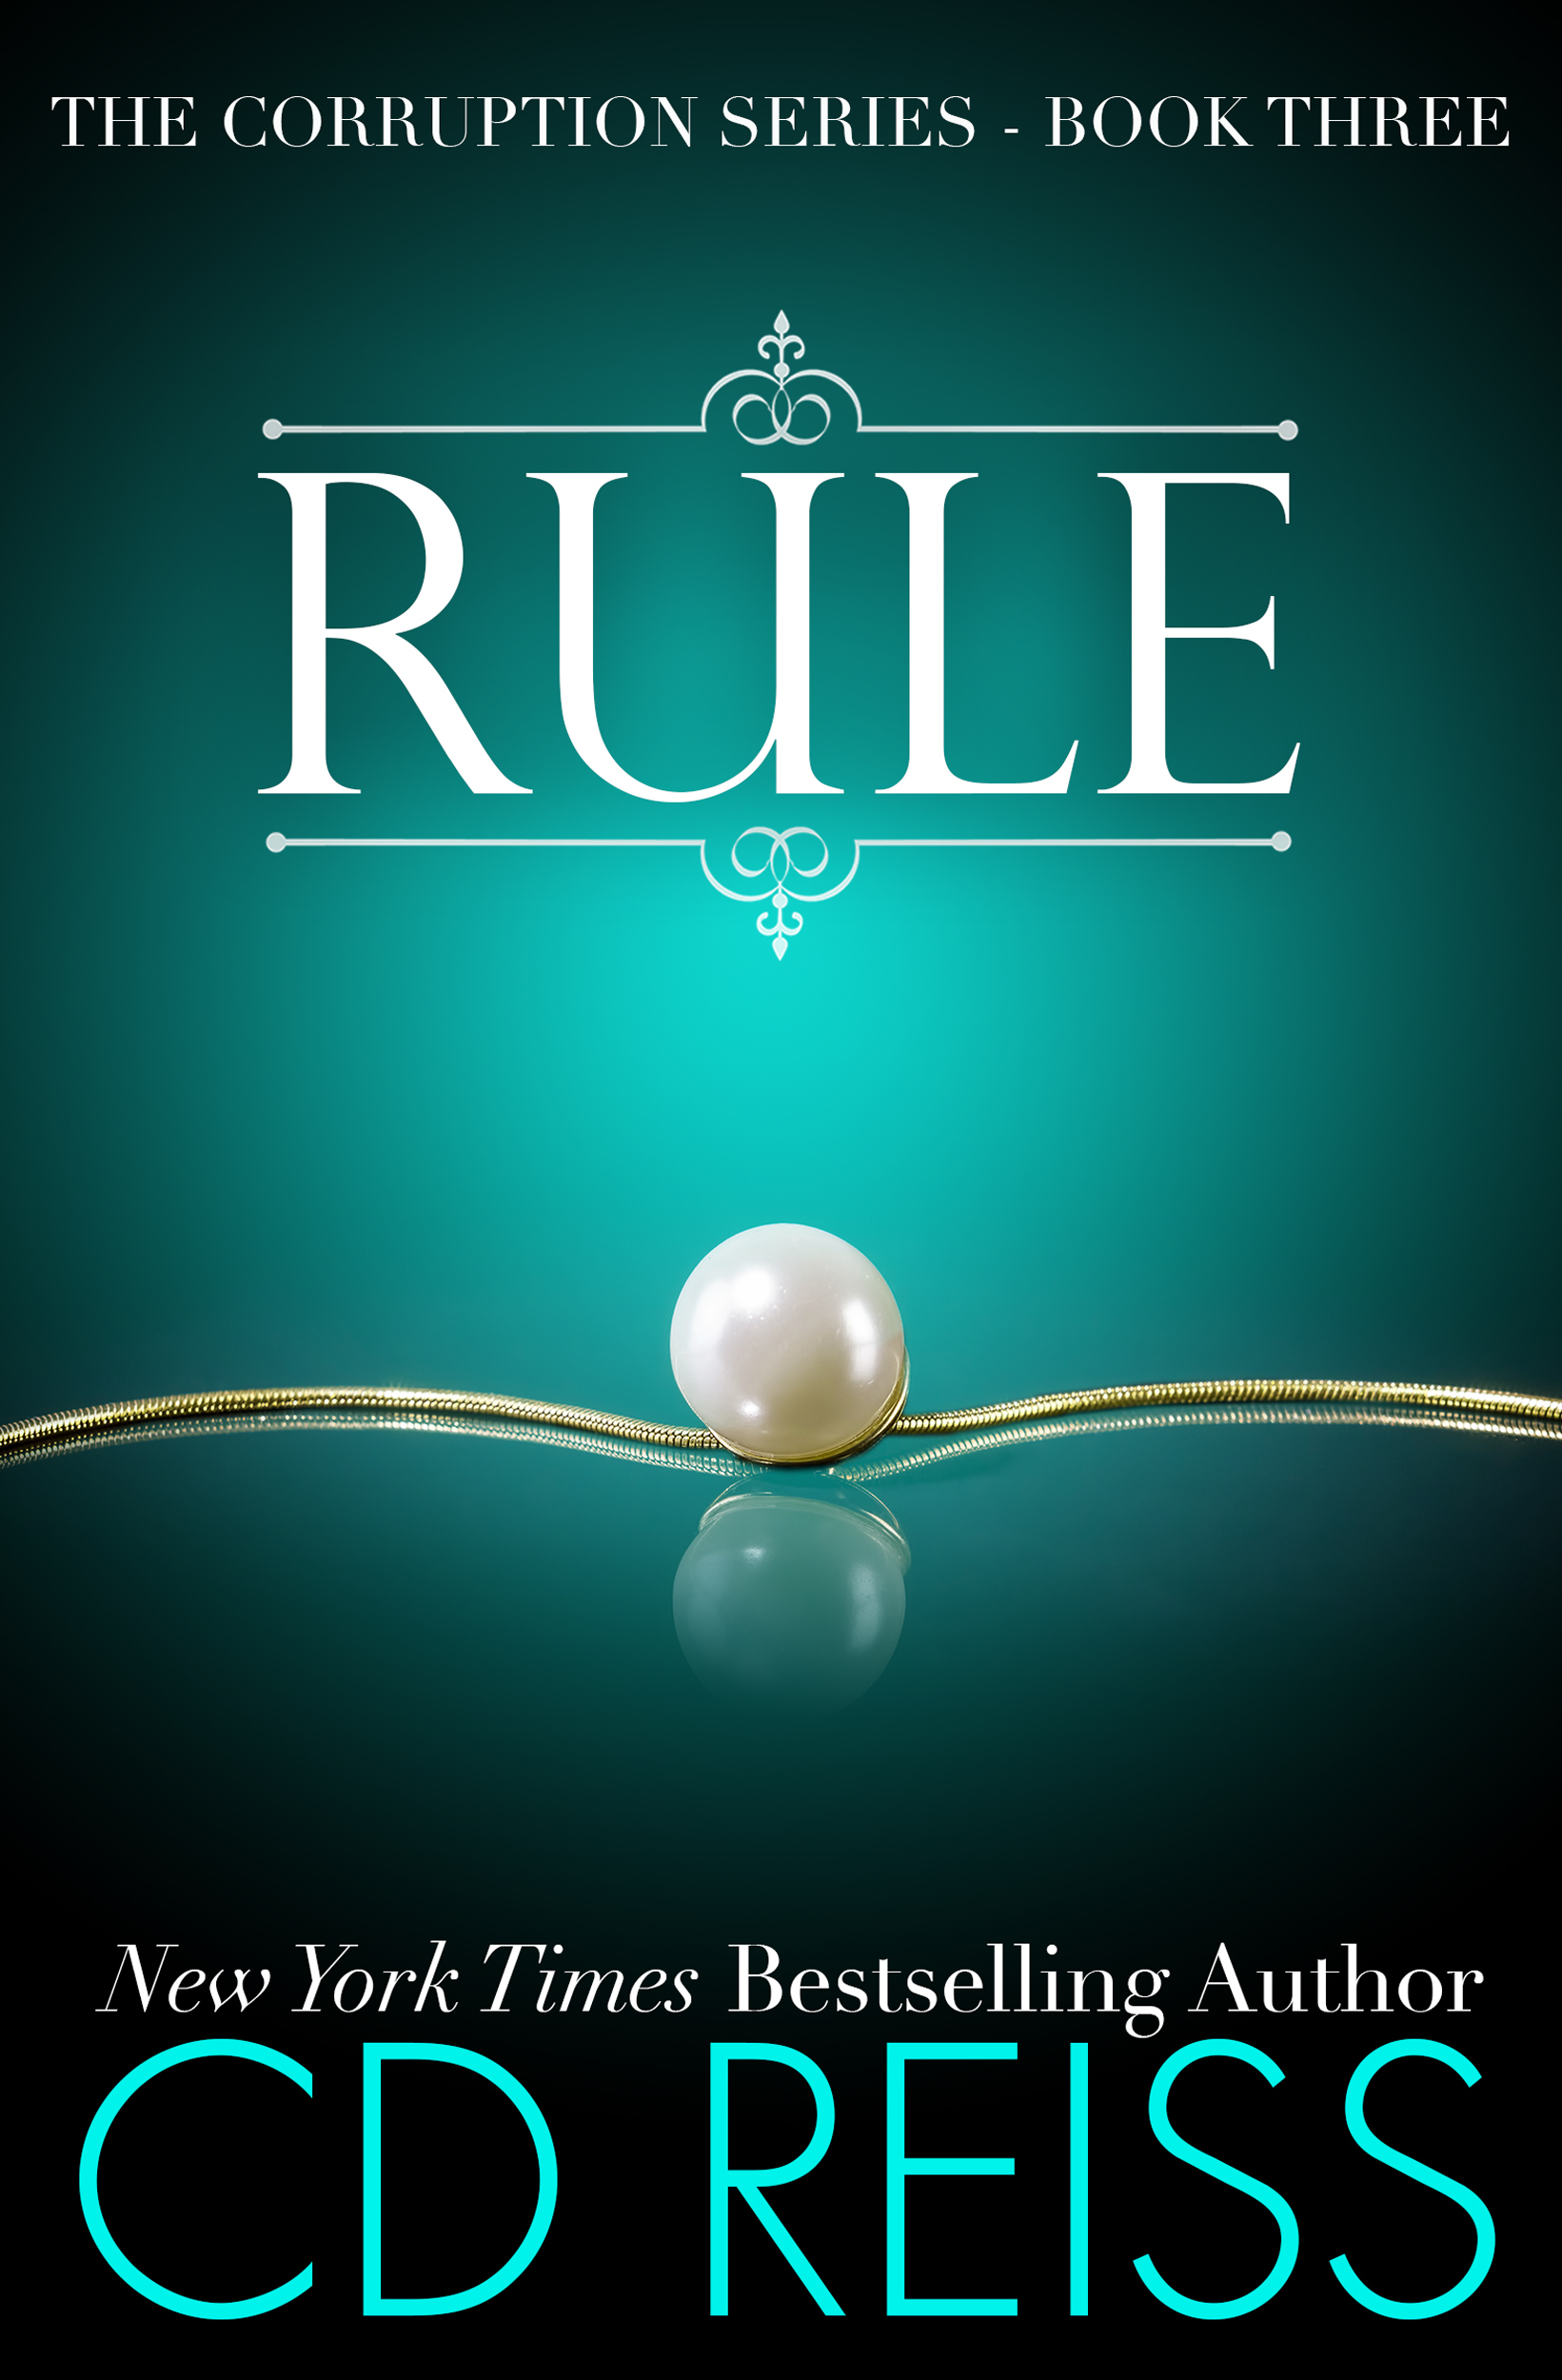 Rule - Corruption Series by New York Times Bestselling Author CD Reiss